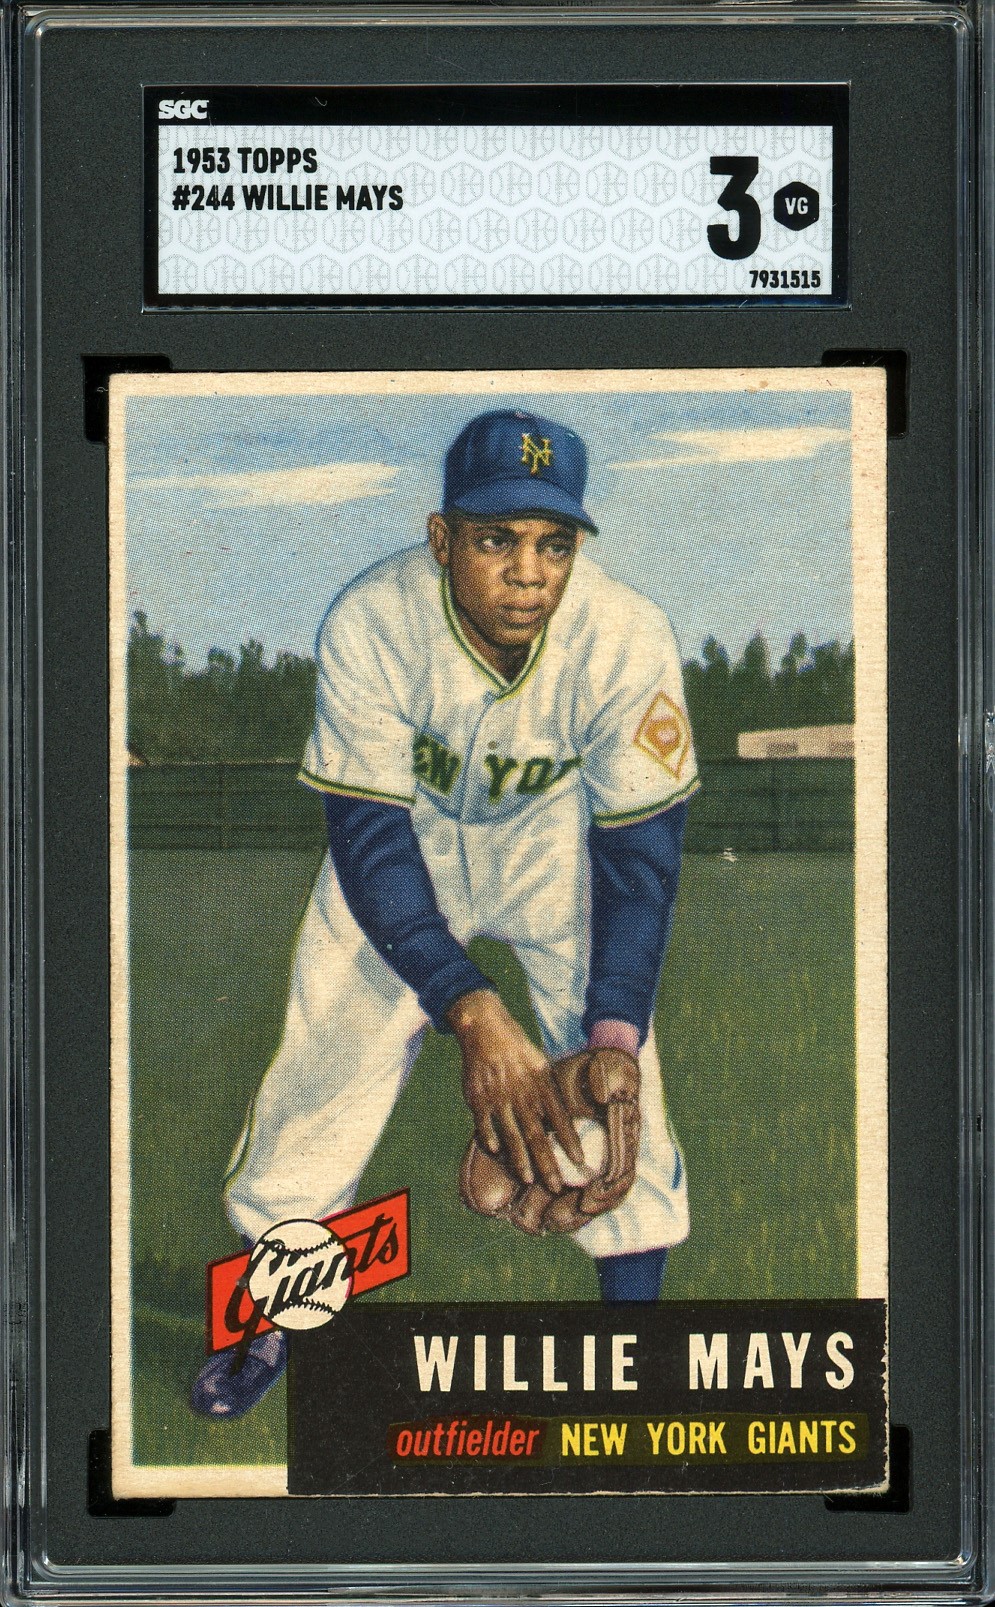 1953 Topps #244 Willie Mays High Number SGC VG 3